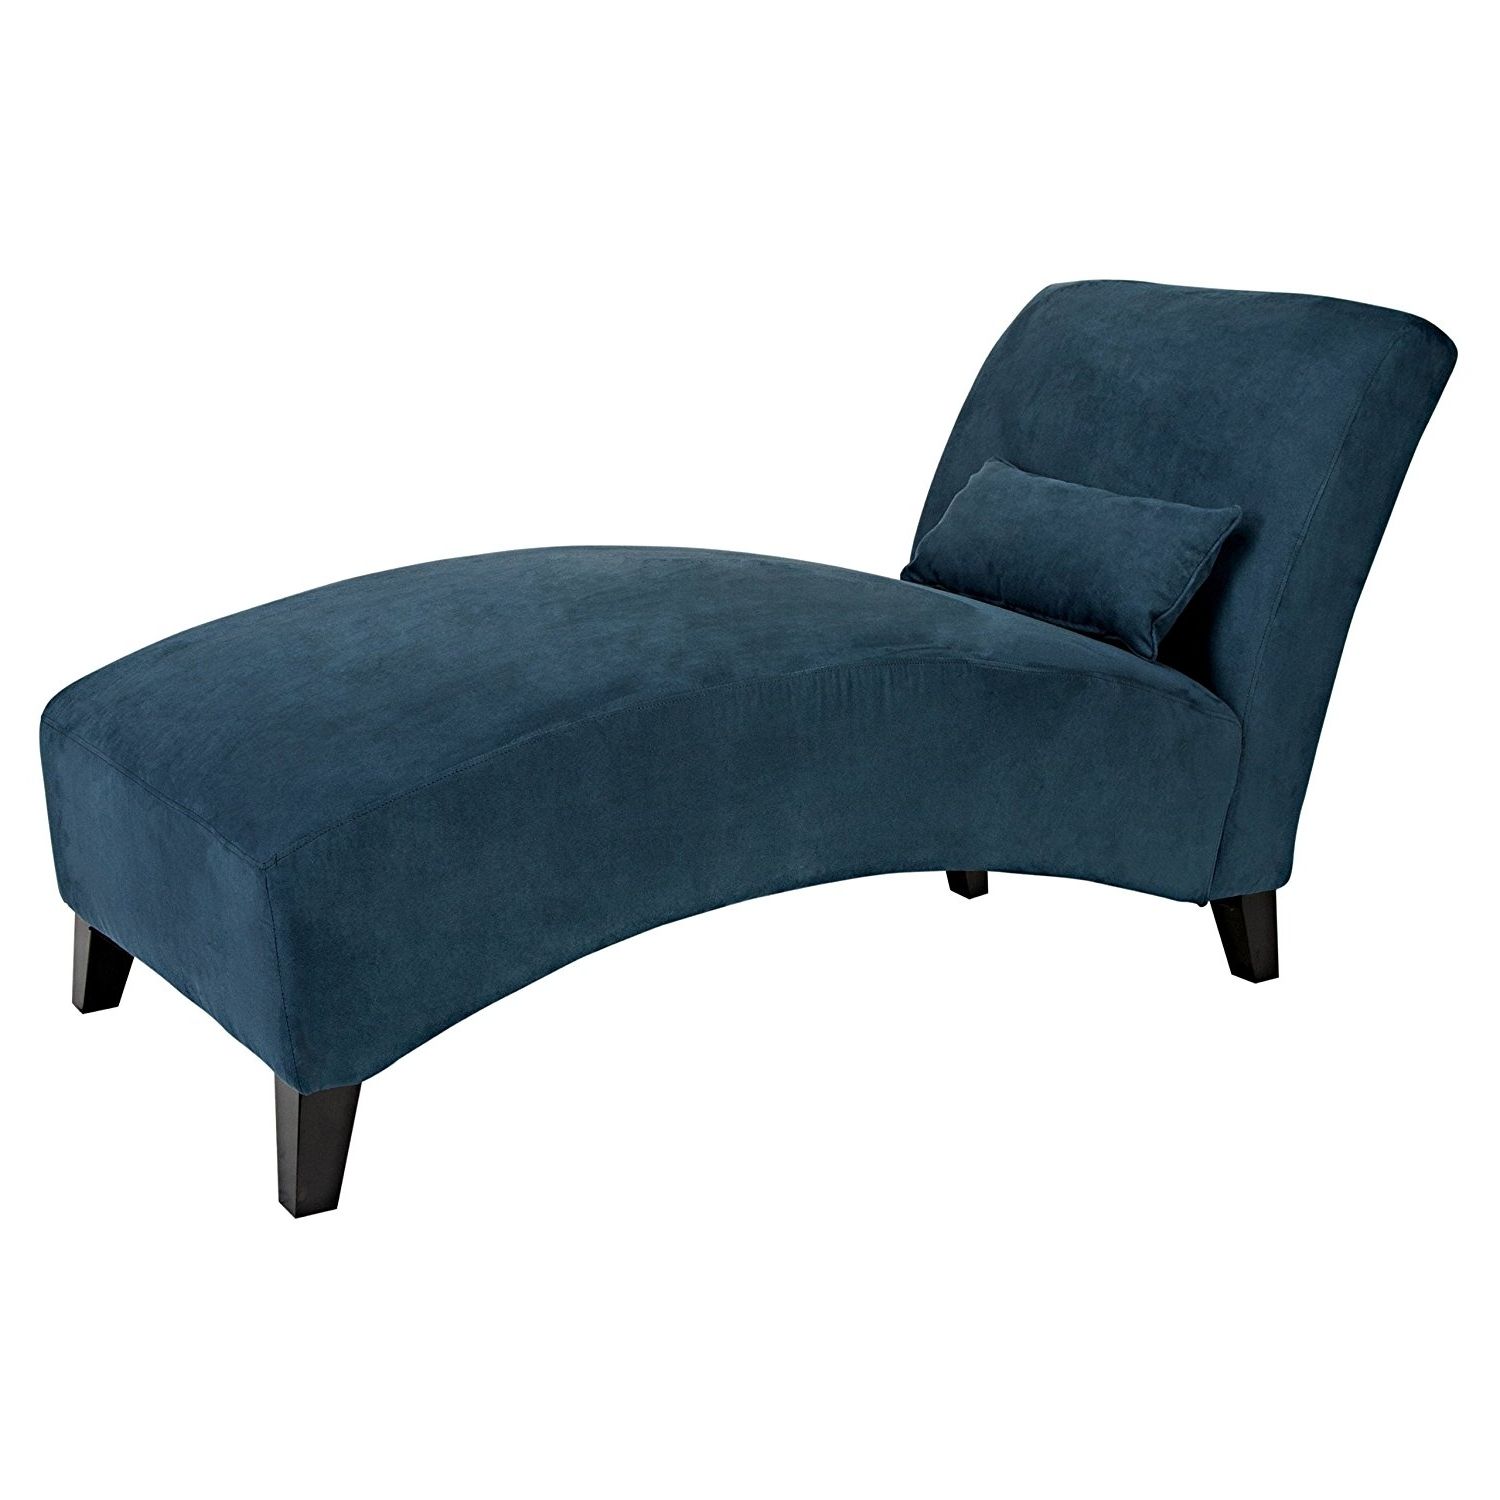 Popular Blue Chaise Lounges Regarding Amazon: Handy Living Cara Chaise In Dark Blue Microfiber (View 8 of 15)